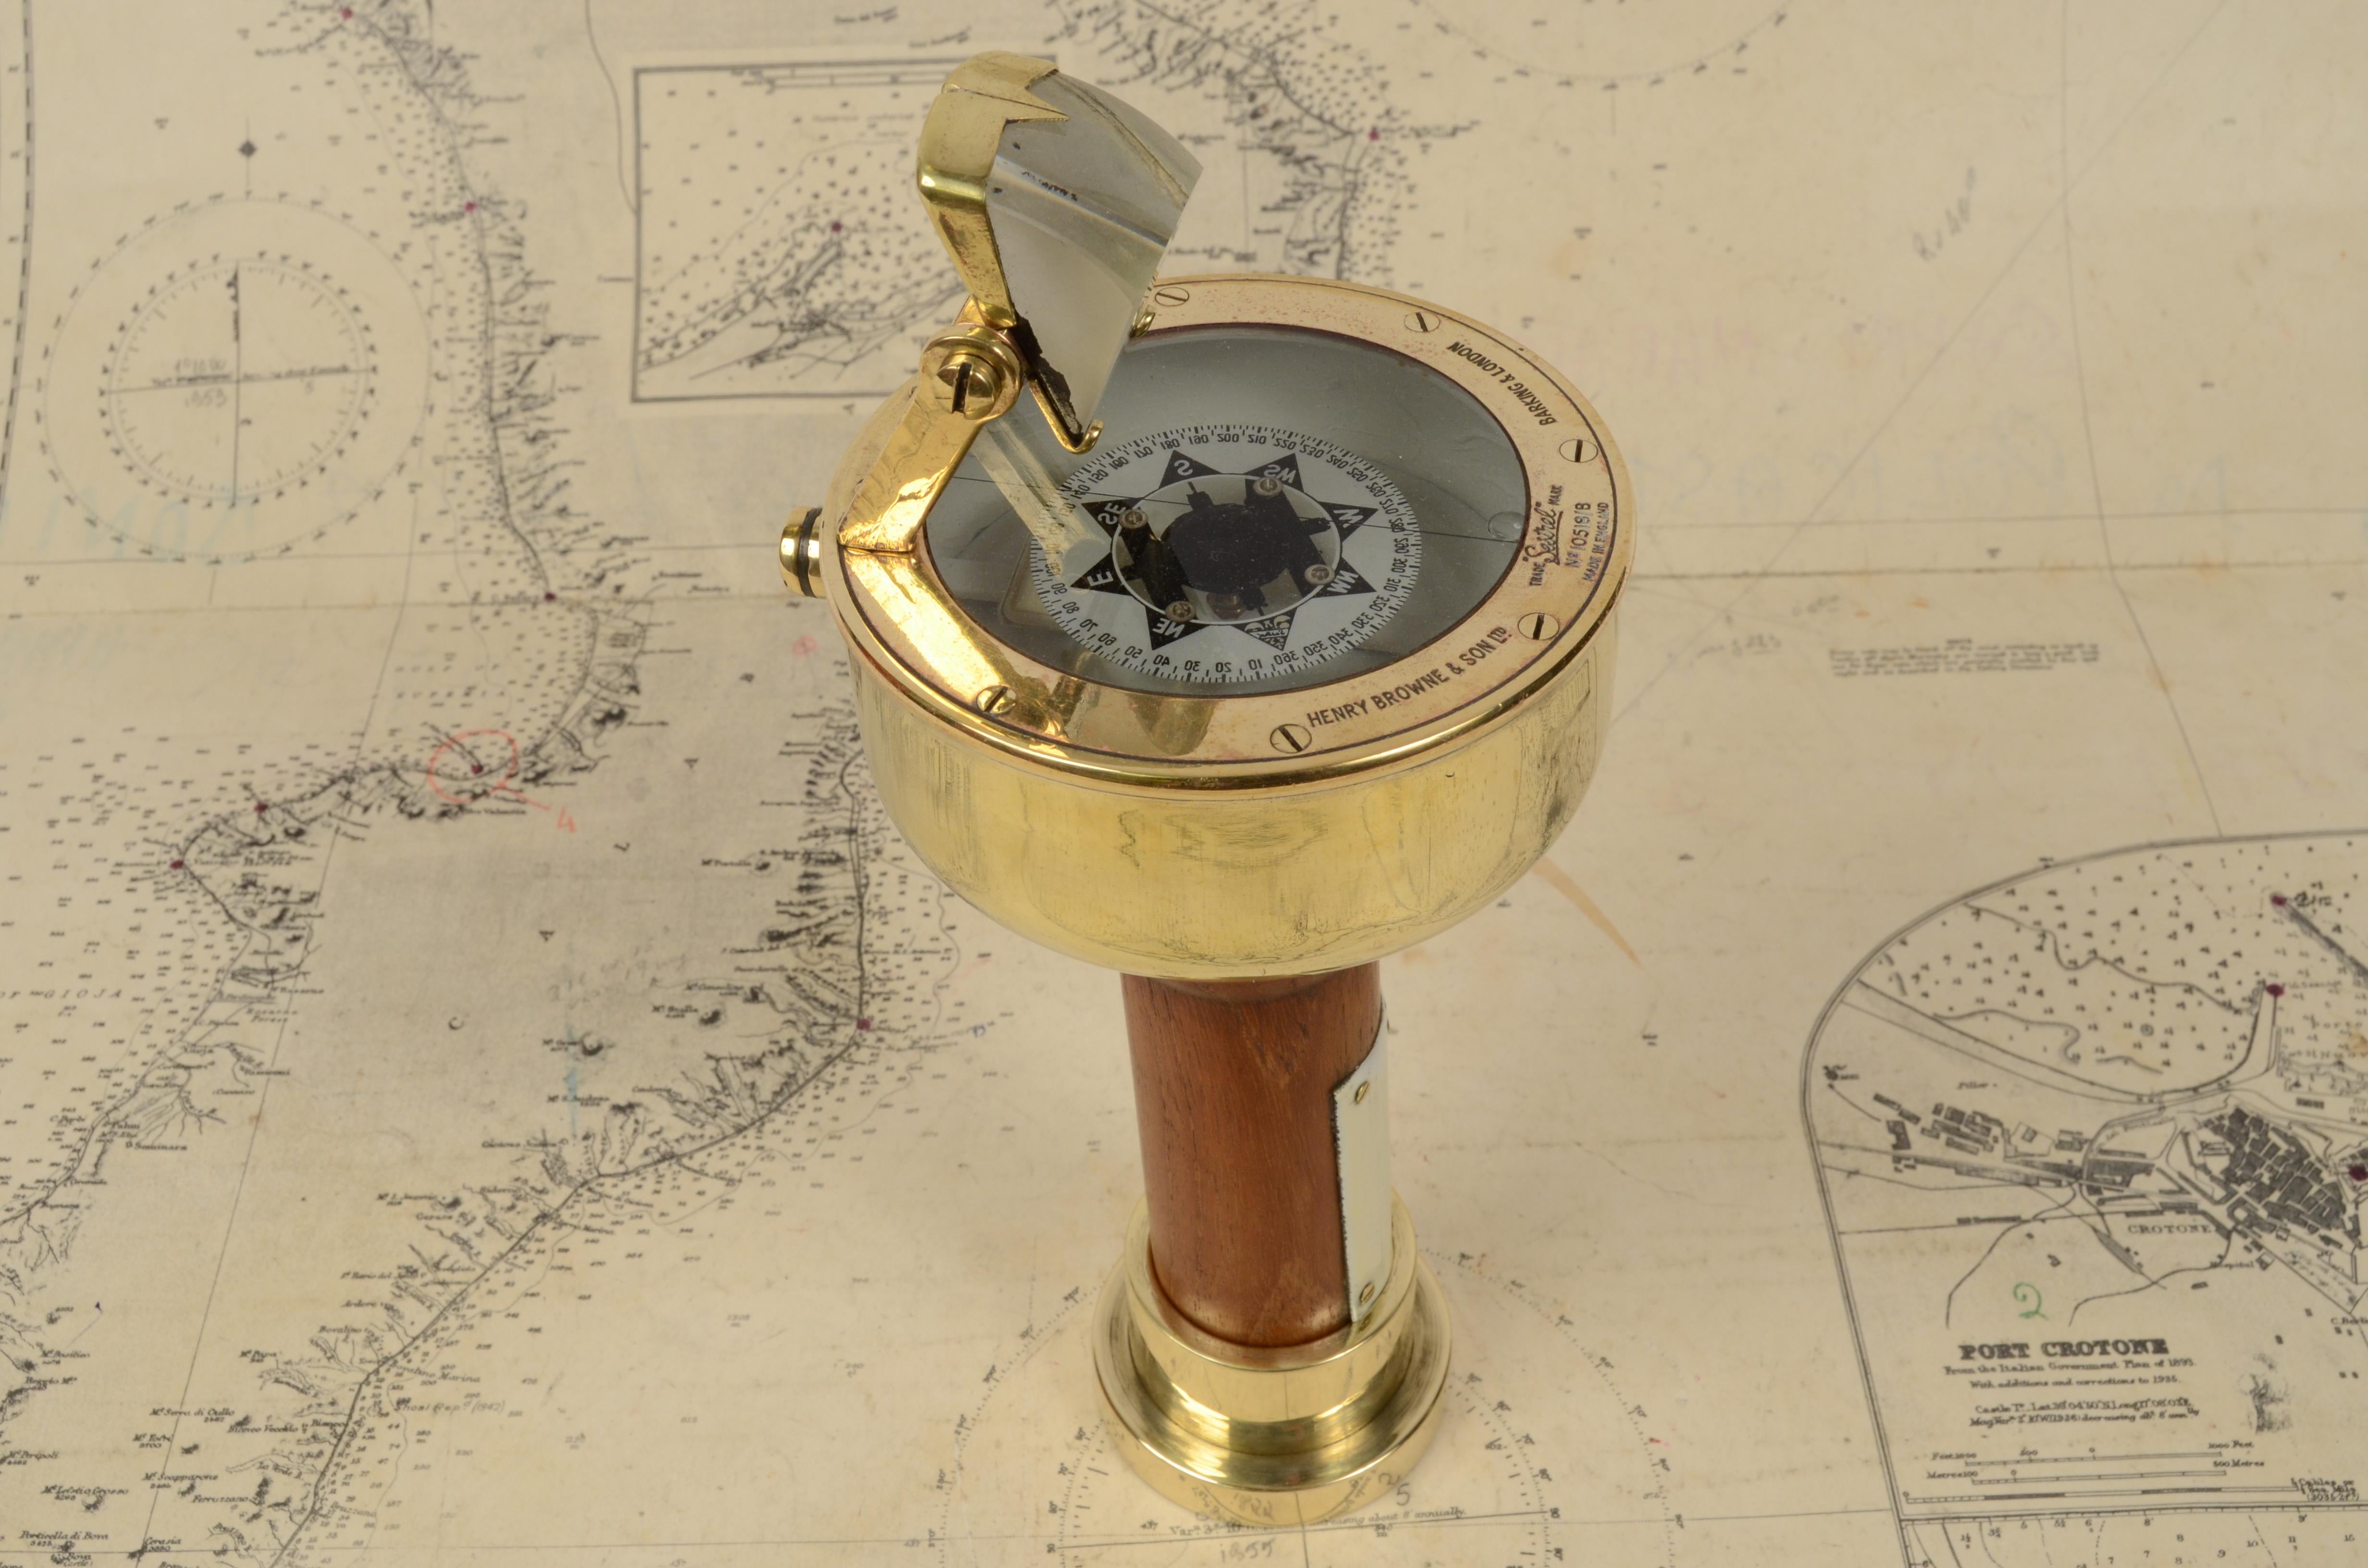 Hand-held magnetic bearing compass, signed Henry Browne & Son Ltd Sestrel Made in England, late 19th century. Support base made of turned brass. Height 23 cm - 9 inches, compass diameter 10.5 cm - 4.13 inches. Very good condition.
It is a small